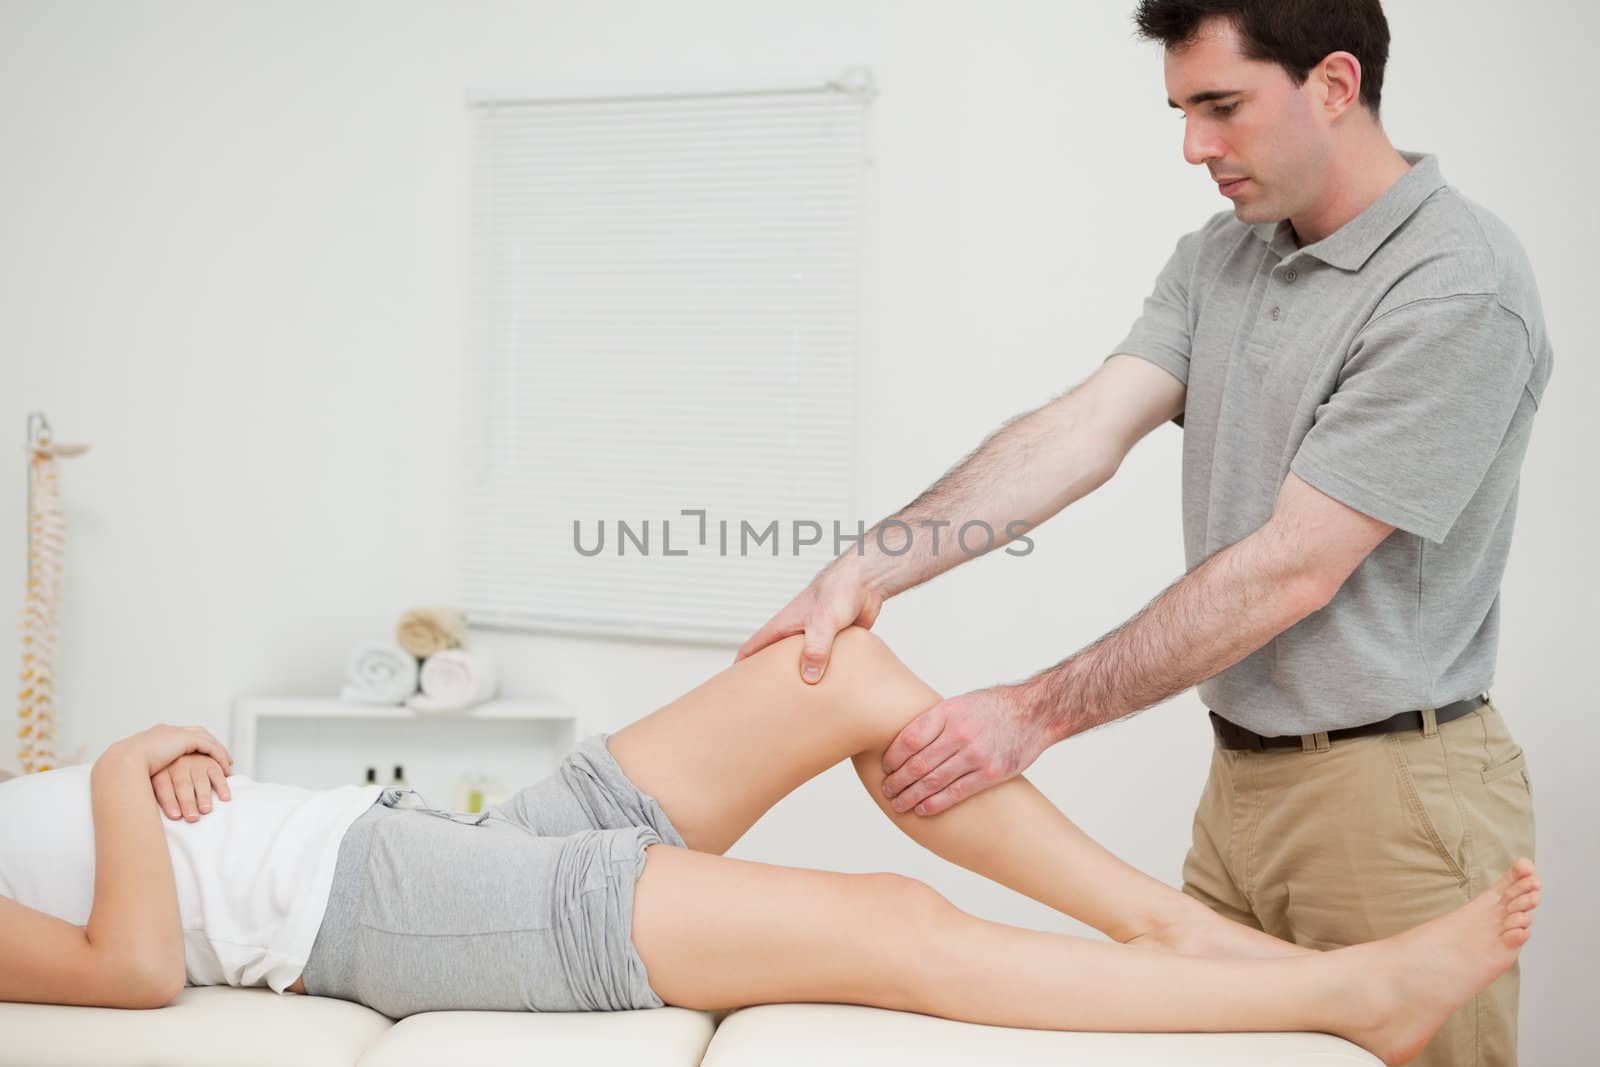 Physiotherapist examining the knee of his patient while touching by Wavebreakmedia